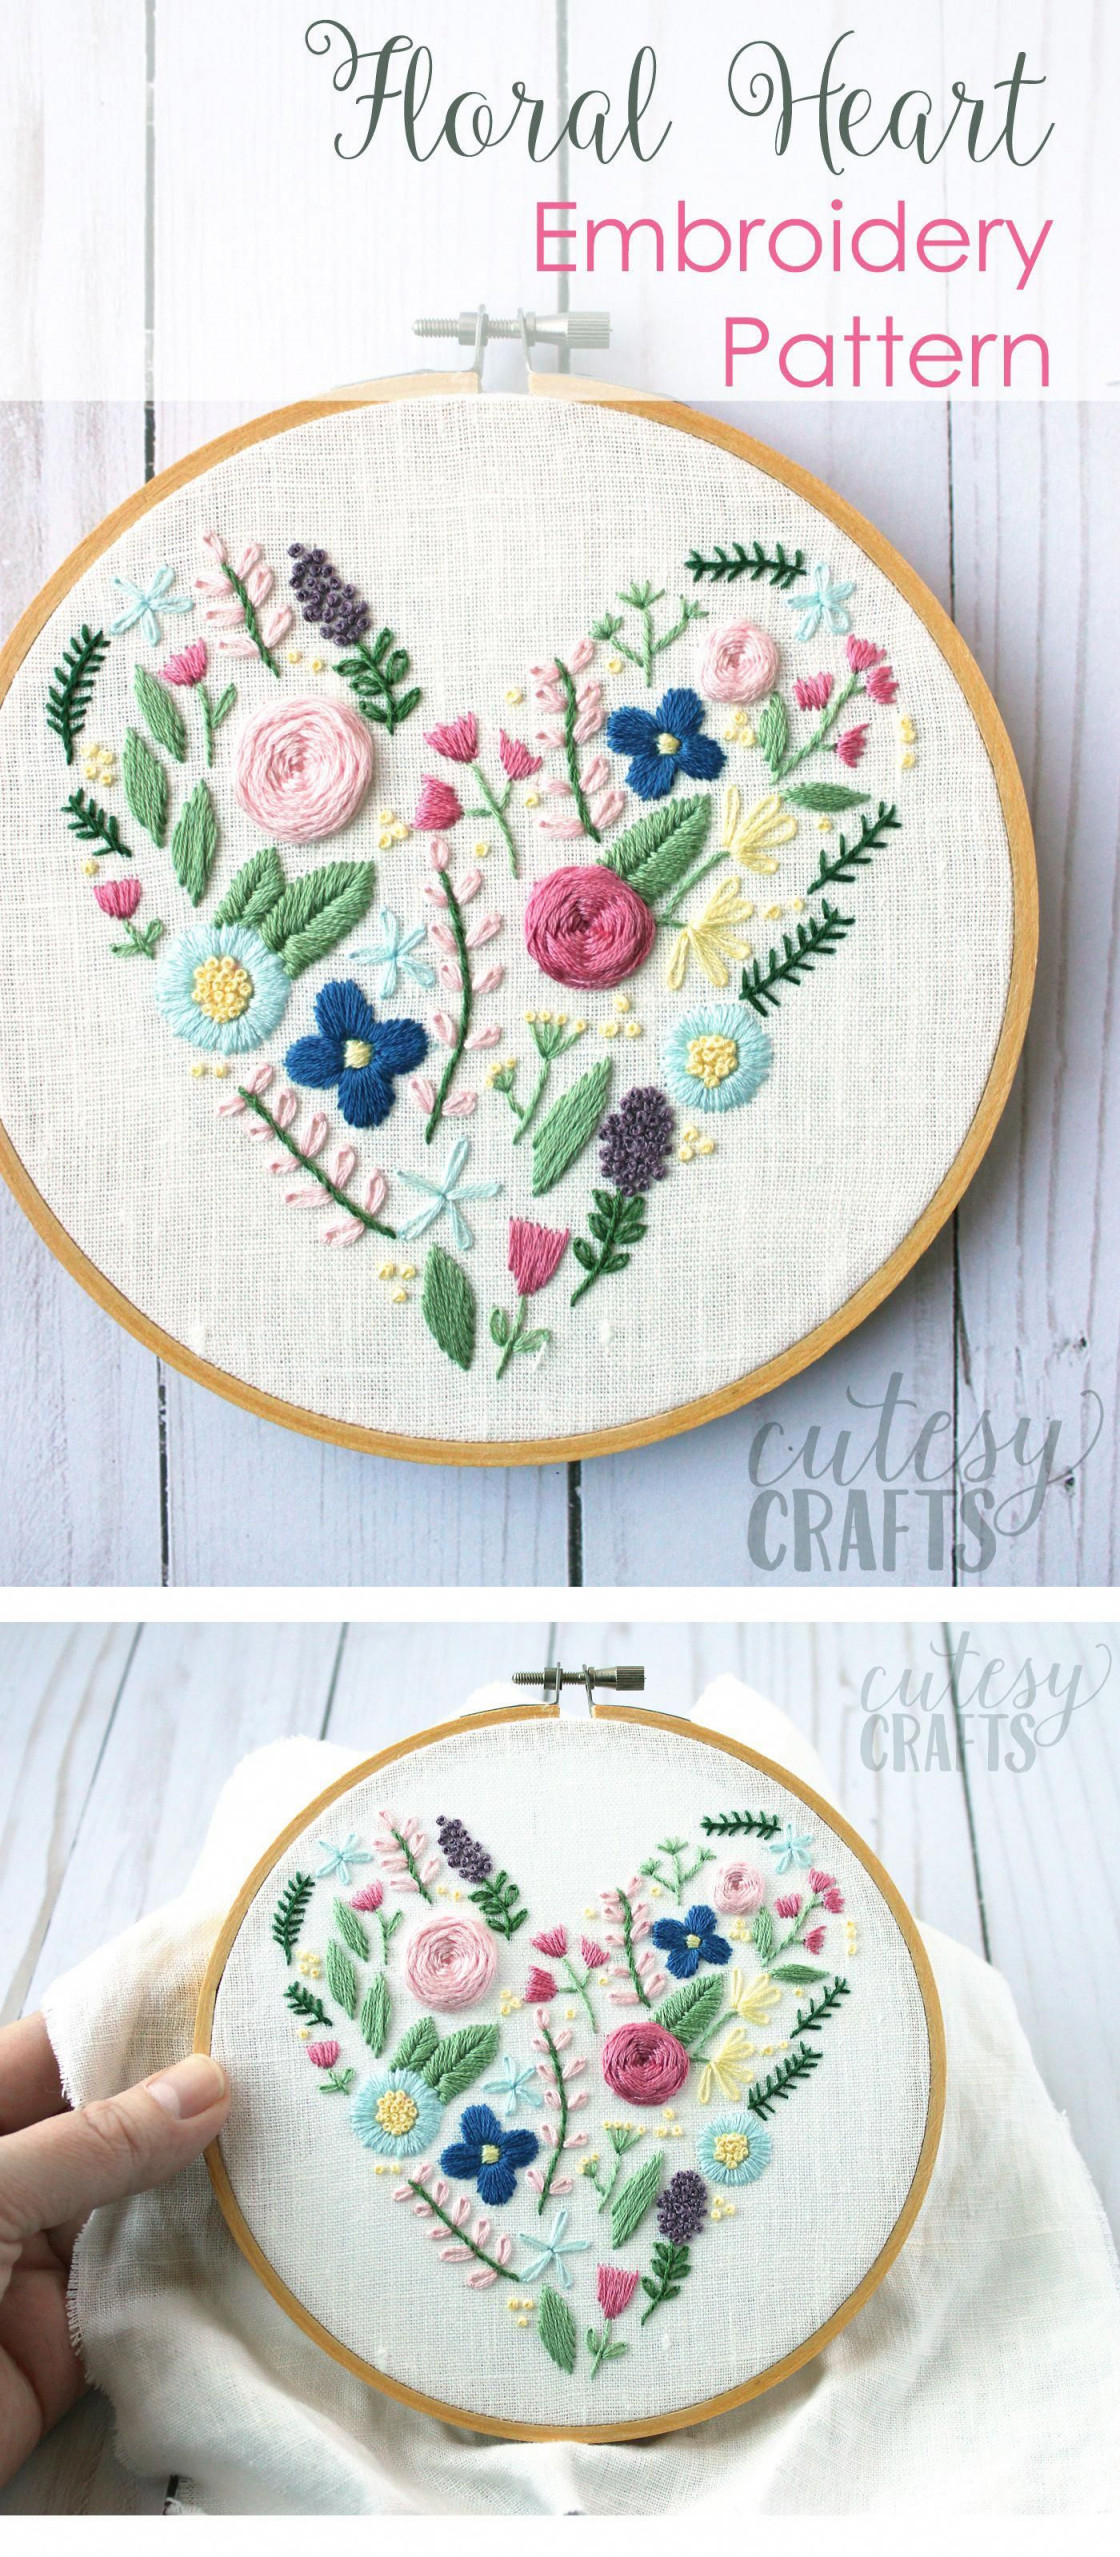 Embroidery Patterns Free Hand Embroidery Patterns For Beginners Unique Learn Hand Embroidery